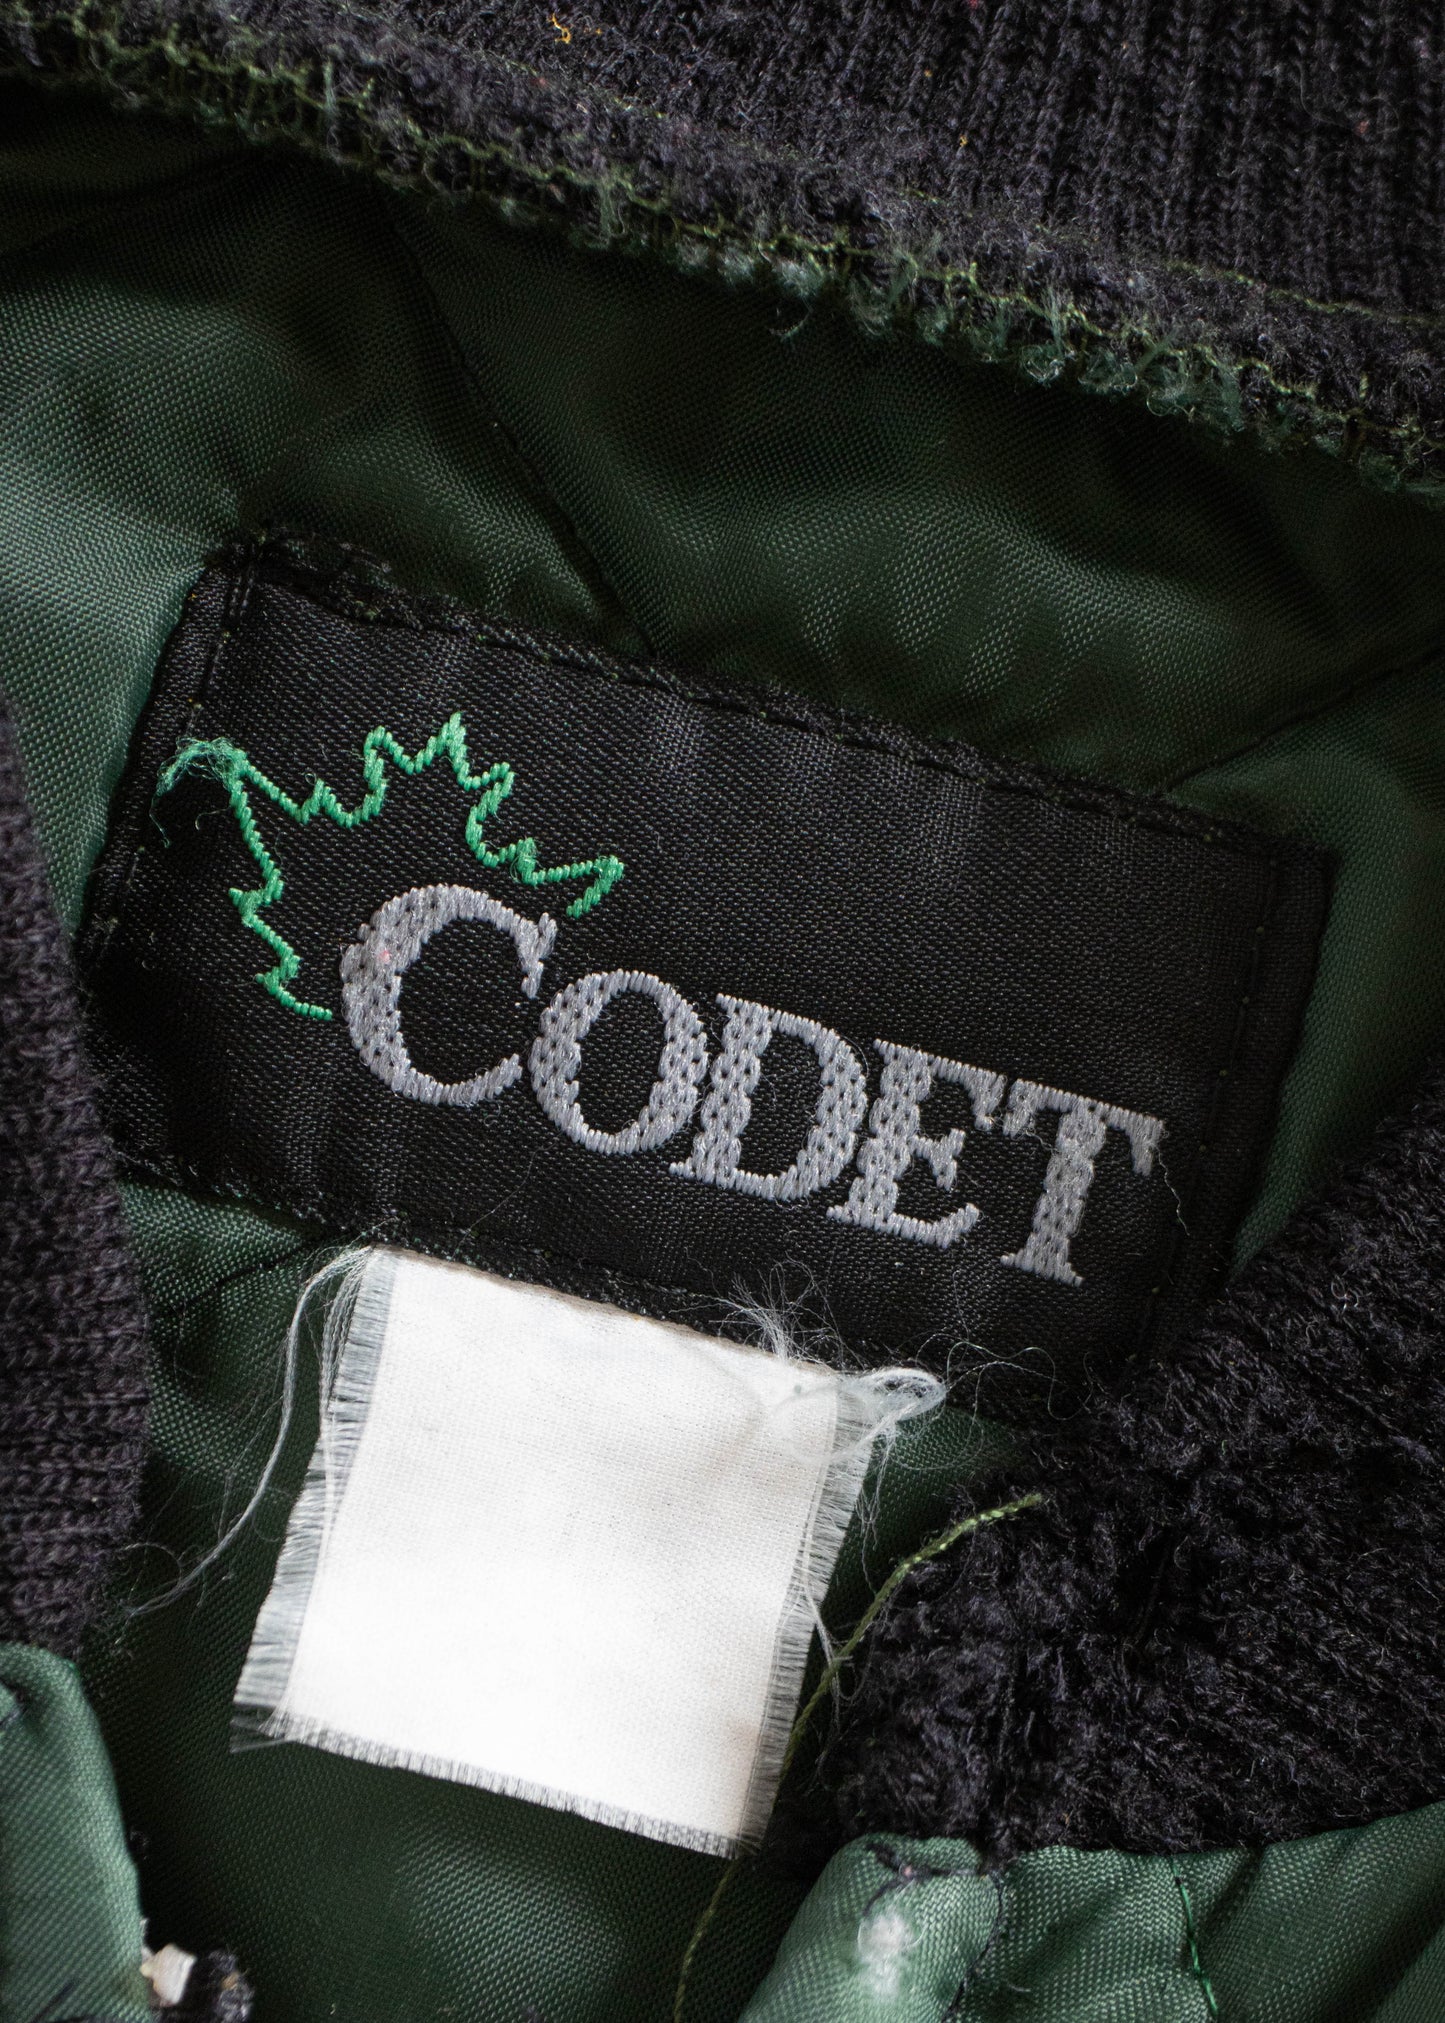 1980s Codet Quilted Nylon Jacket Size 2XL/3XL